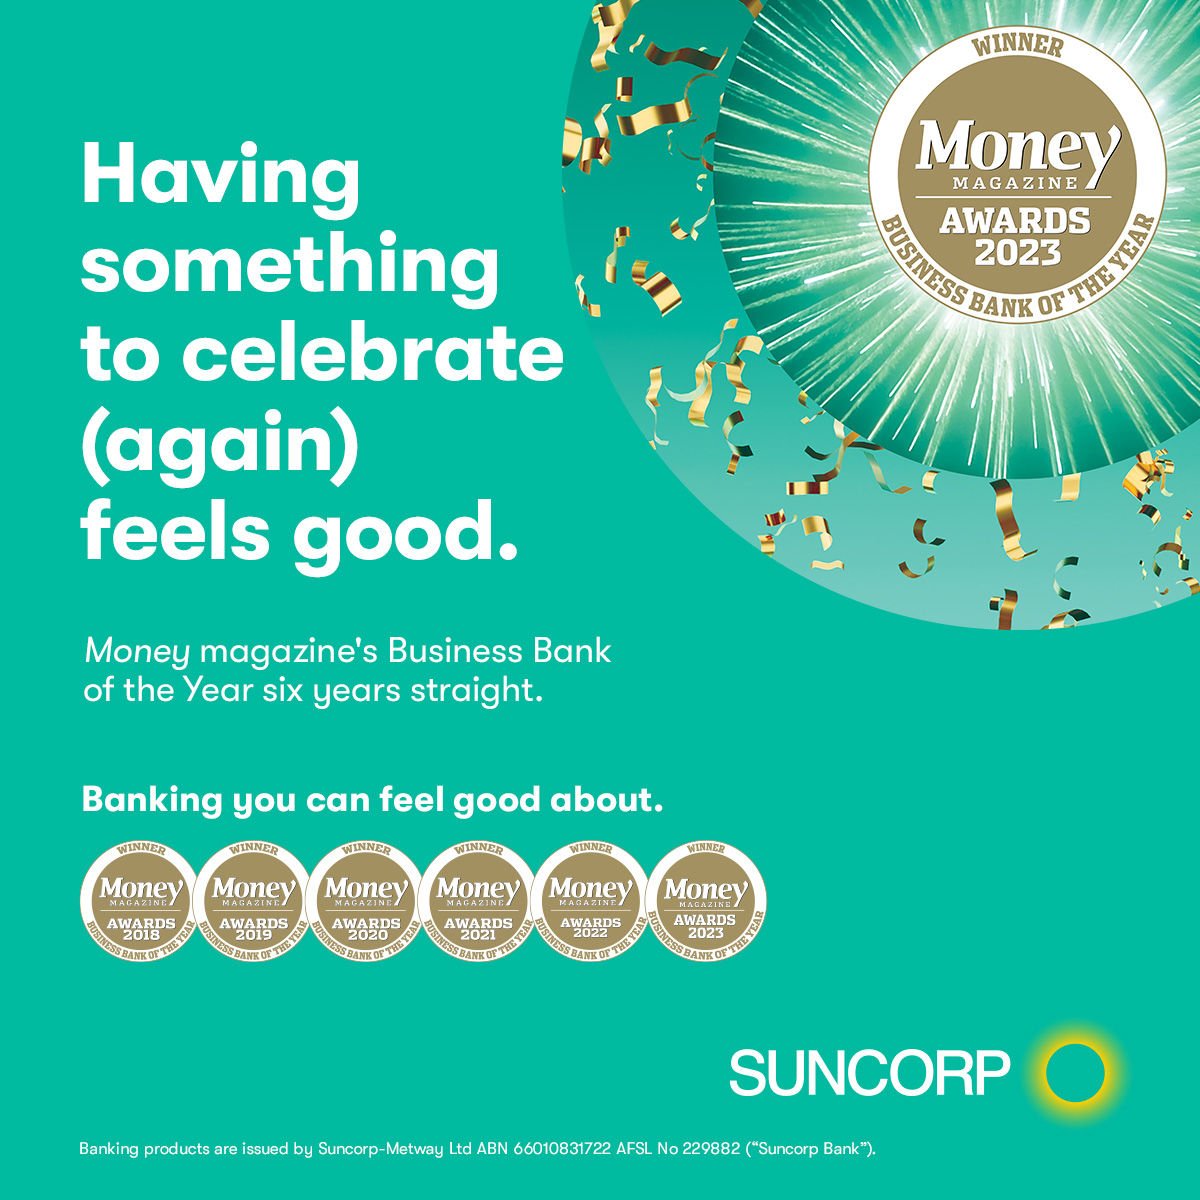 Suncorp Bank named Money Magazine's Business Bank of the Year 